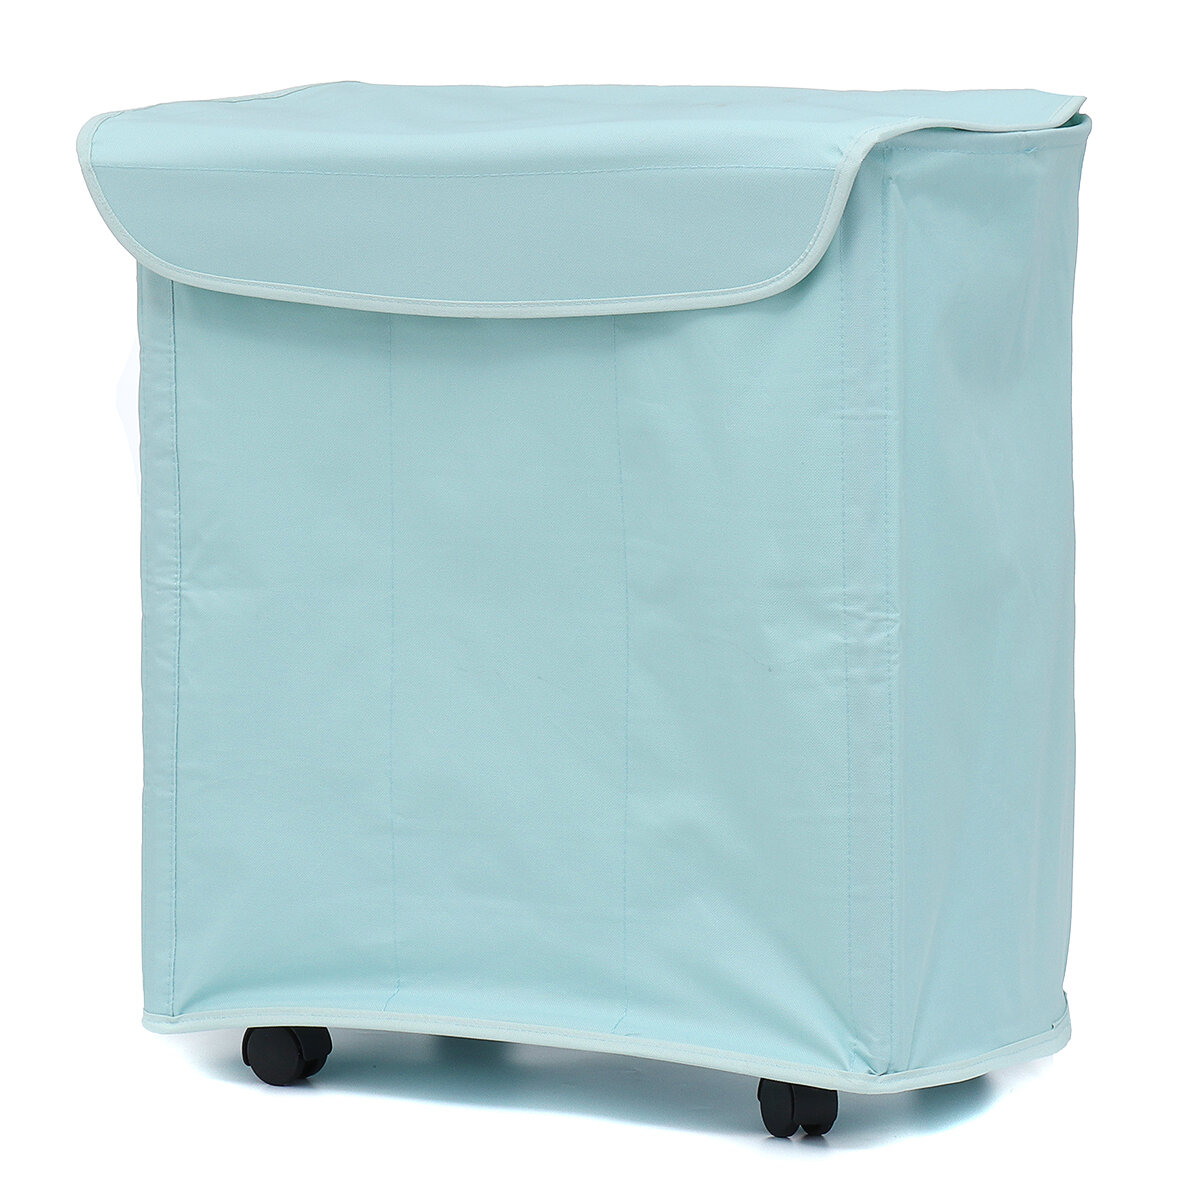 

Large Storage Laundry Basket Bathroom Dirty Clothing Foldable 3 Grids Fabric Collapsible Hamper Foldable with Wheels